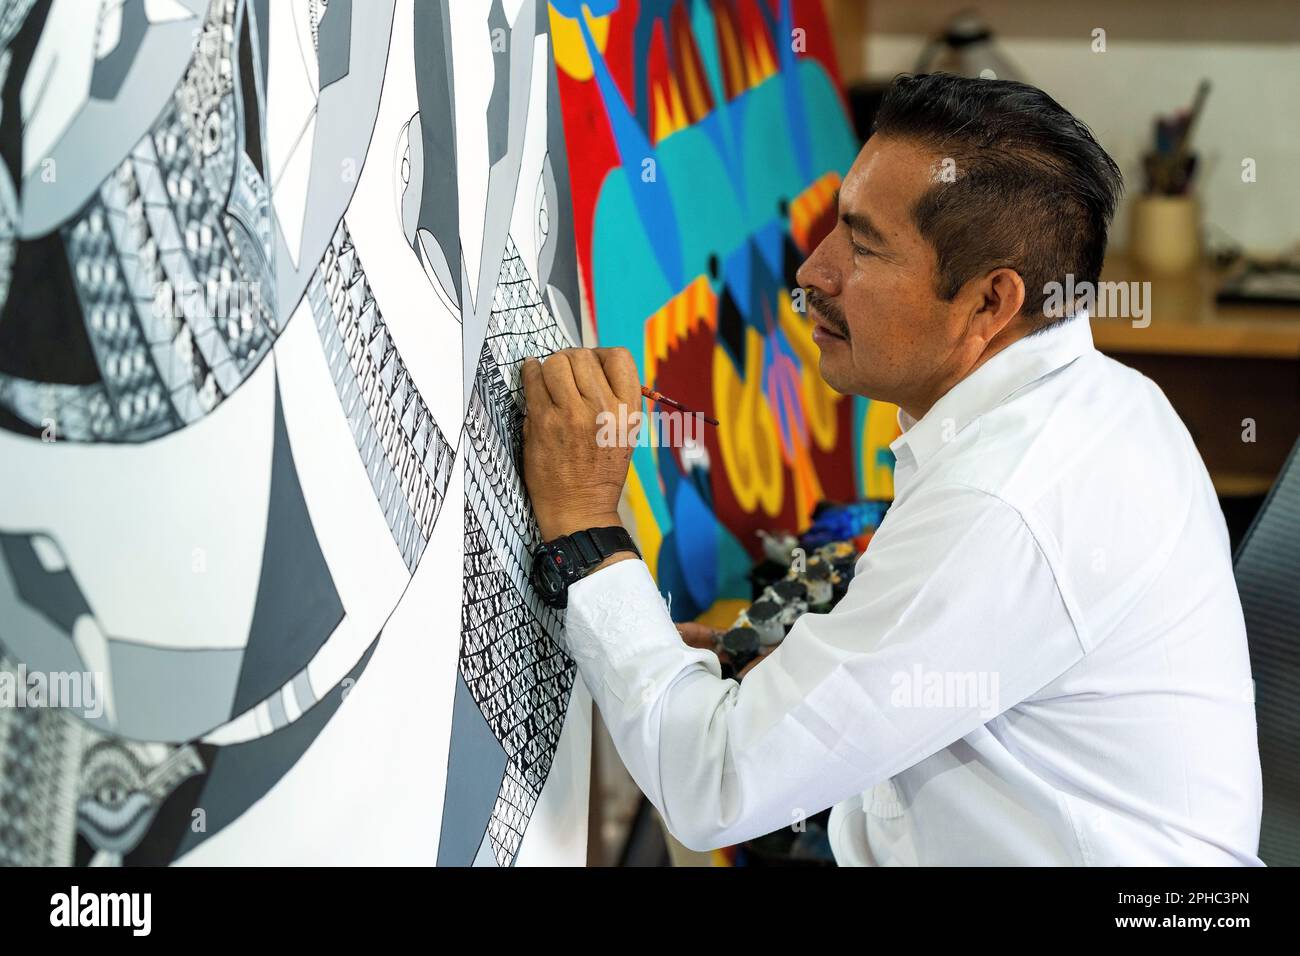 Mexican artist Jacobo Angeles doing a painting in traditional alebrije style, San Martin Tilcajete, Oaxaca, Mexico. Stock Photo